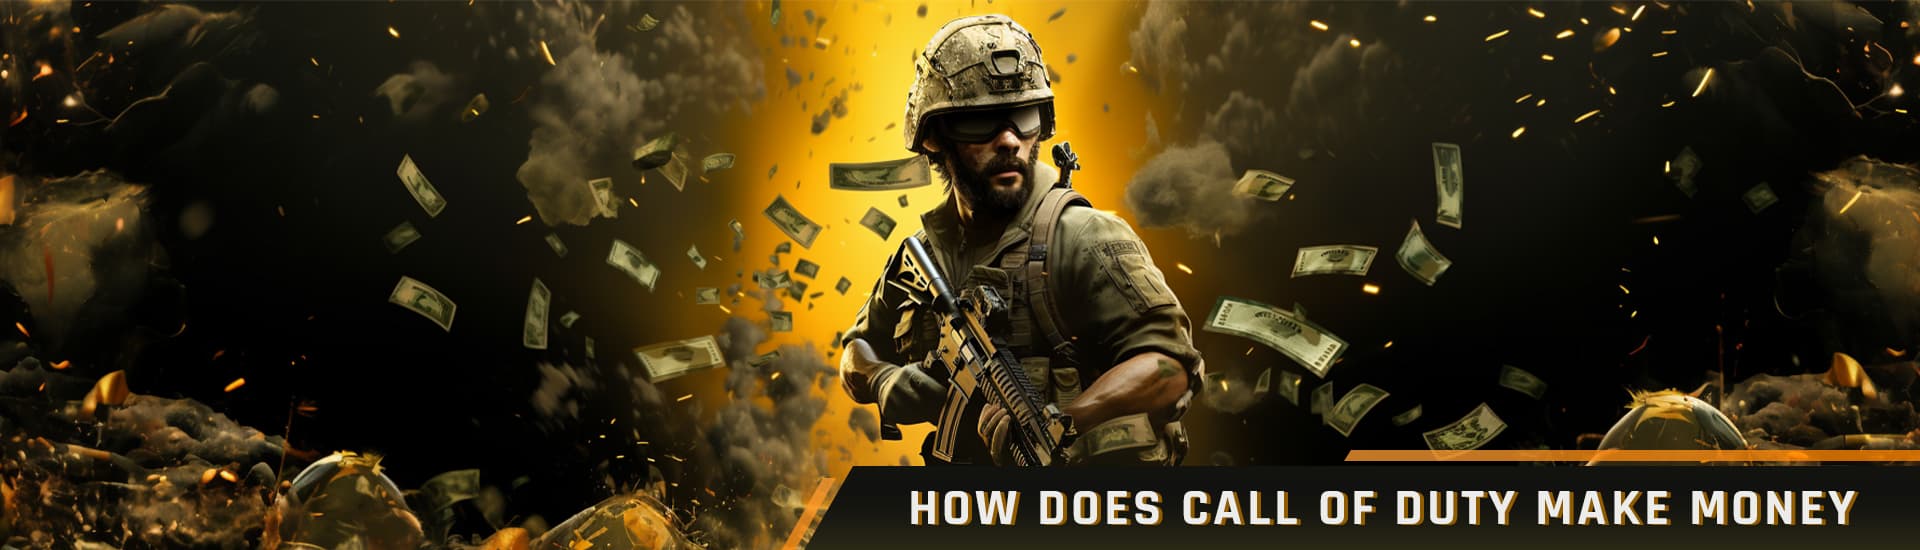 How does call of duty make money